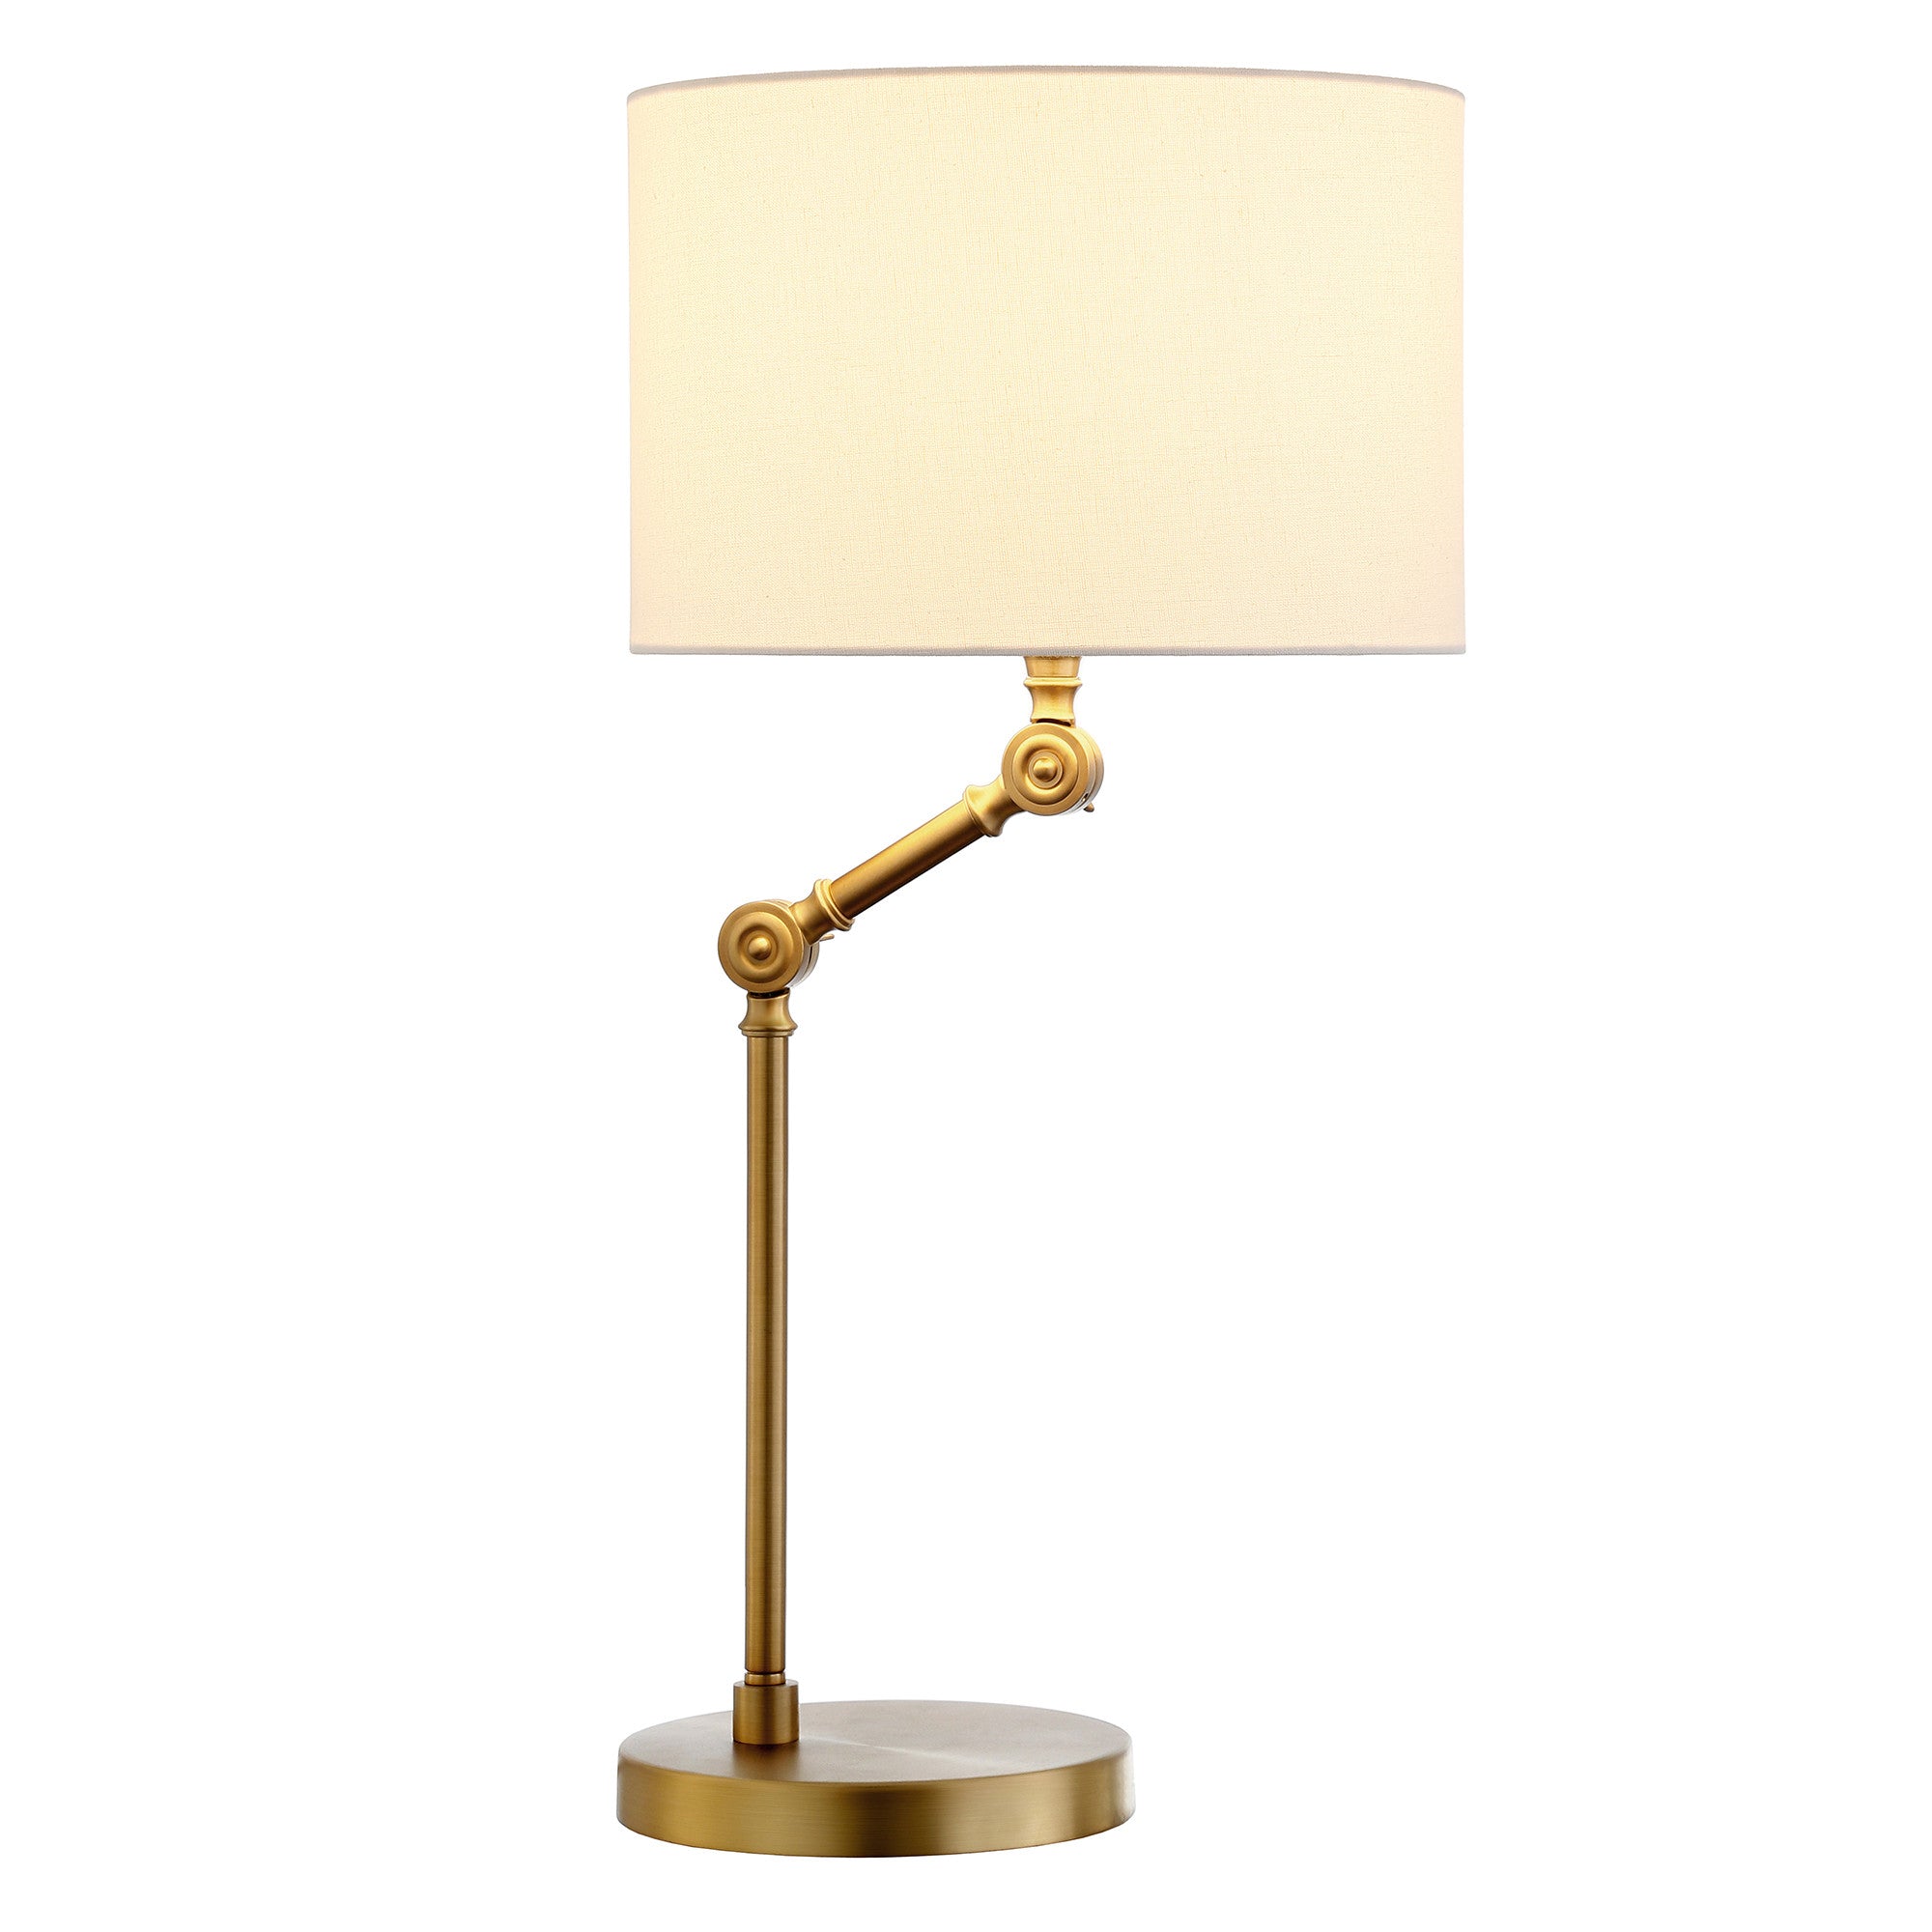 24" Gold Metal Adjustable Table Lamp With White Drum Shade